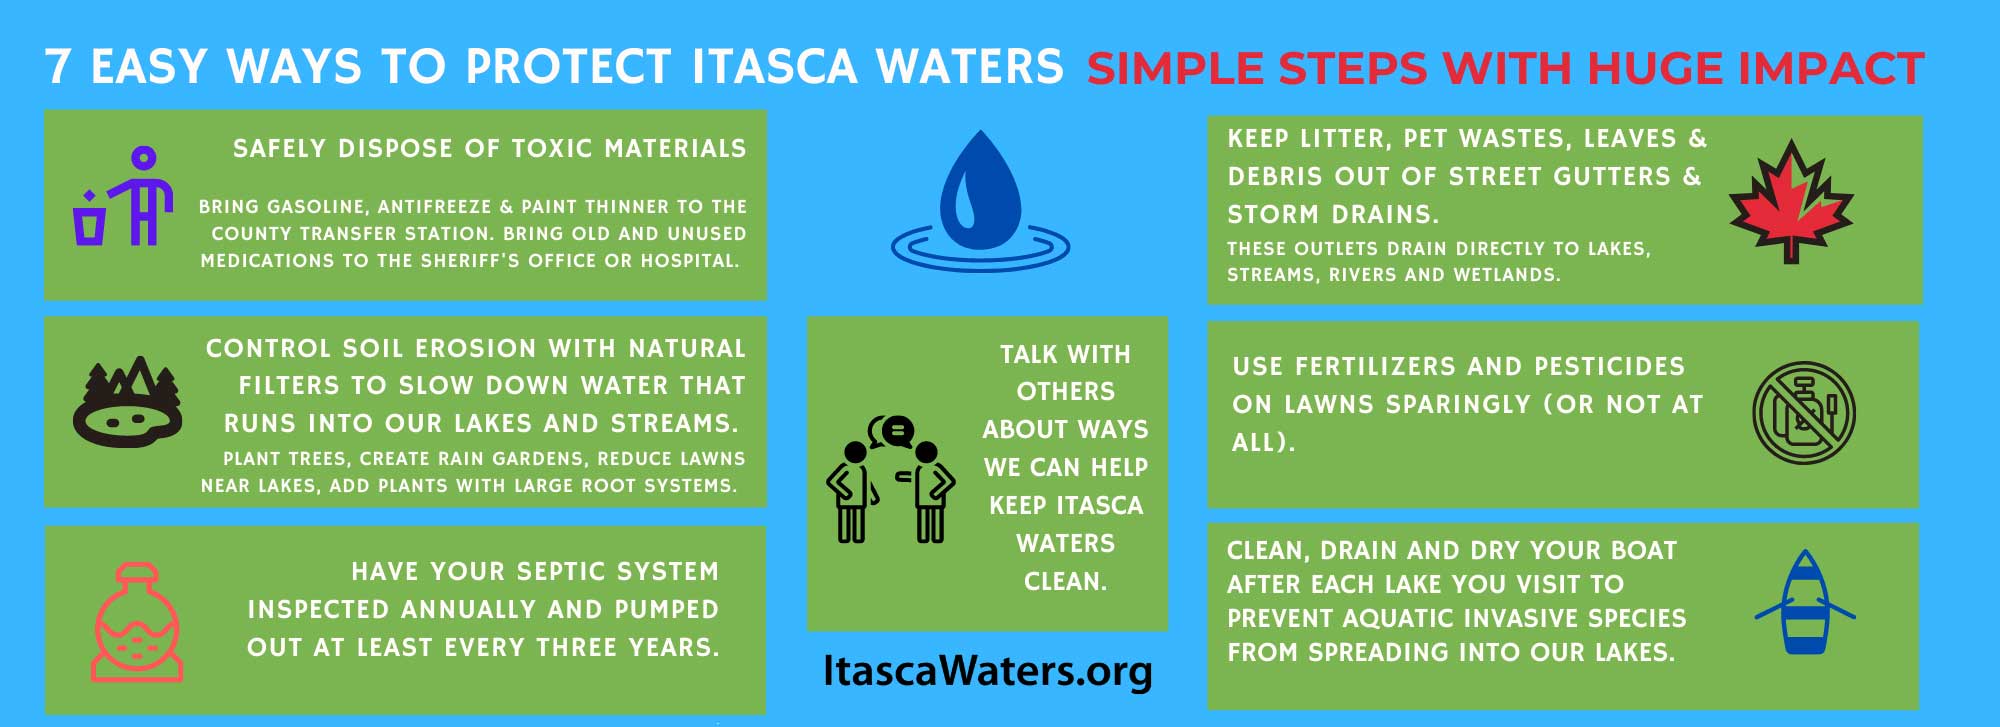 Ways to save Itasca Waters